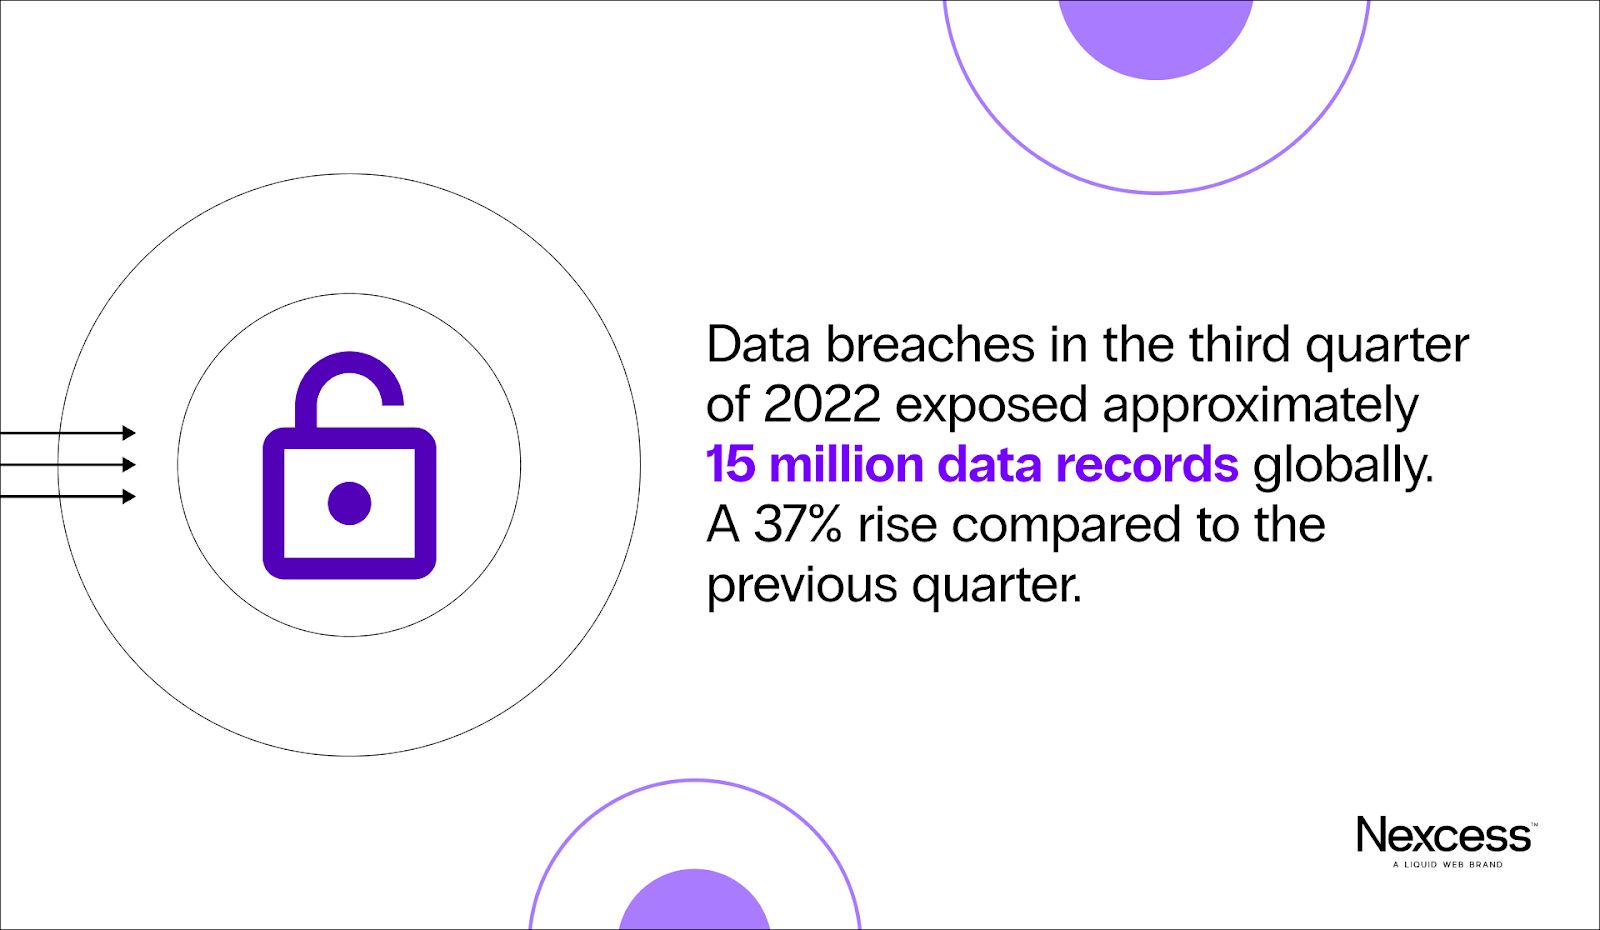 Data breaches in the third quarter of 2022.